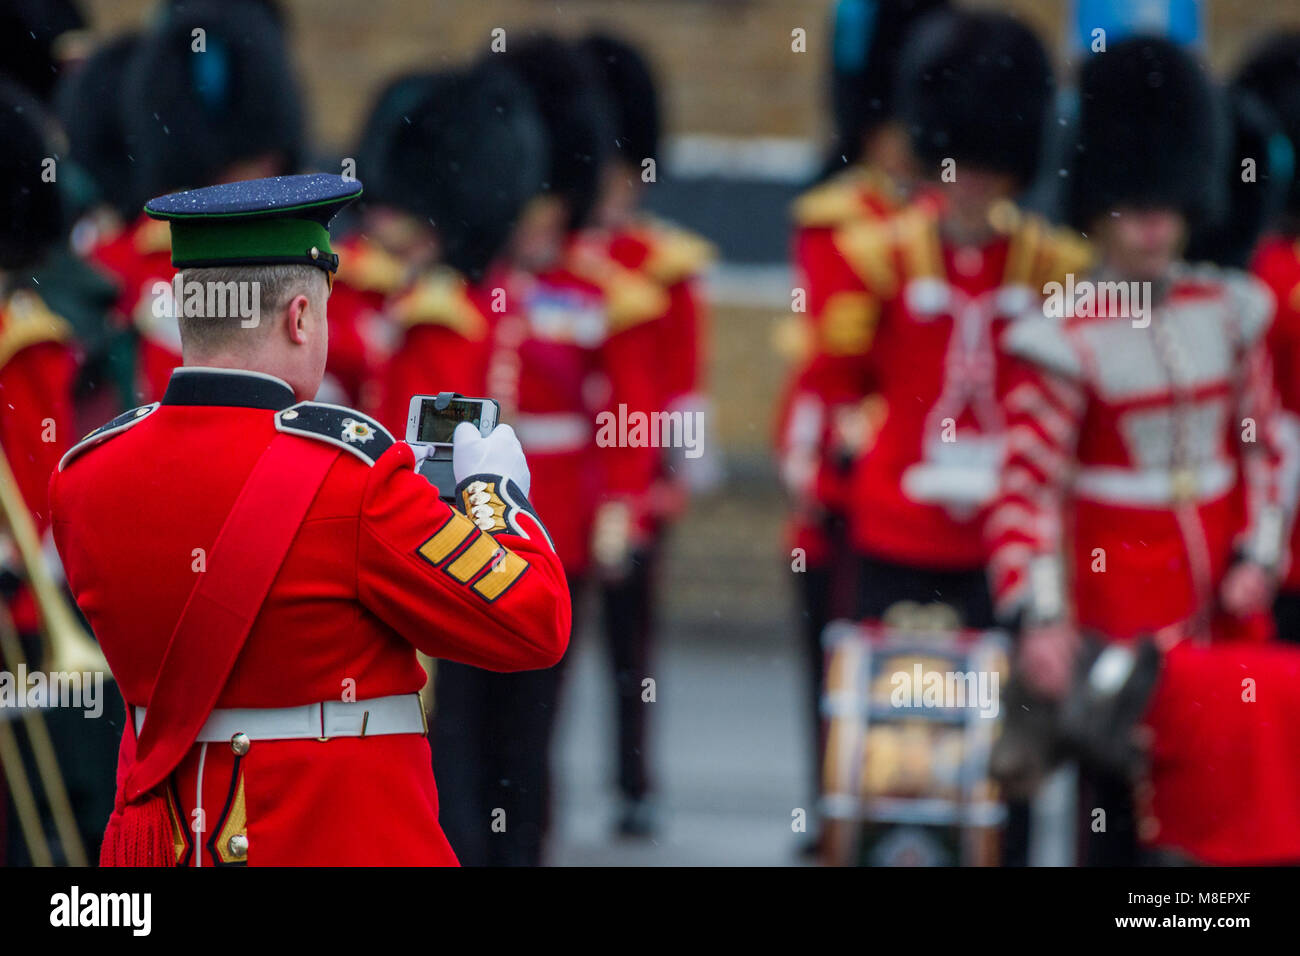 London, UK, 17 Mar 2018. Even Sergeants use phone cameras - The Duke of Cambridge, Colonel of the Irish Guards, accompanied by The Duchess of Cambridge, visited the 1st Battalion Irish Guards at their St. Patrick's Day Parade. Credit: Guy Bell/Alamy Live News Stock Photo